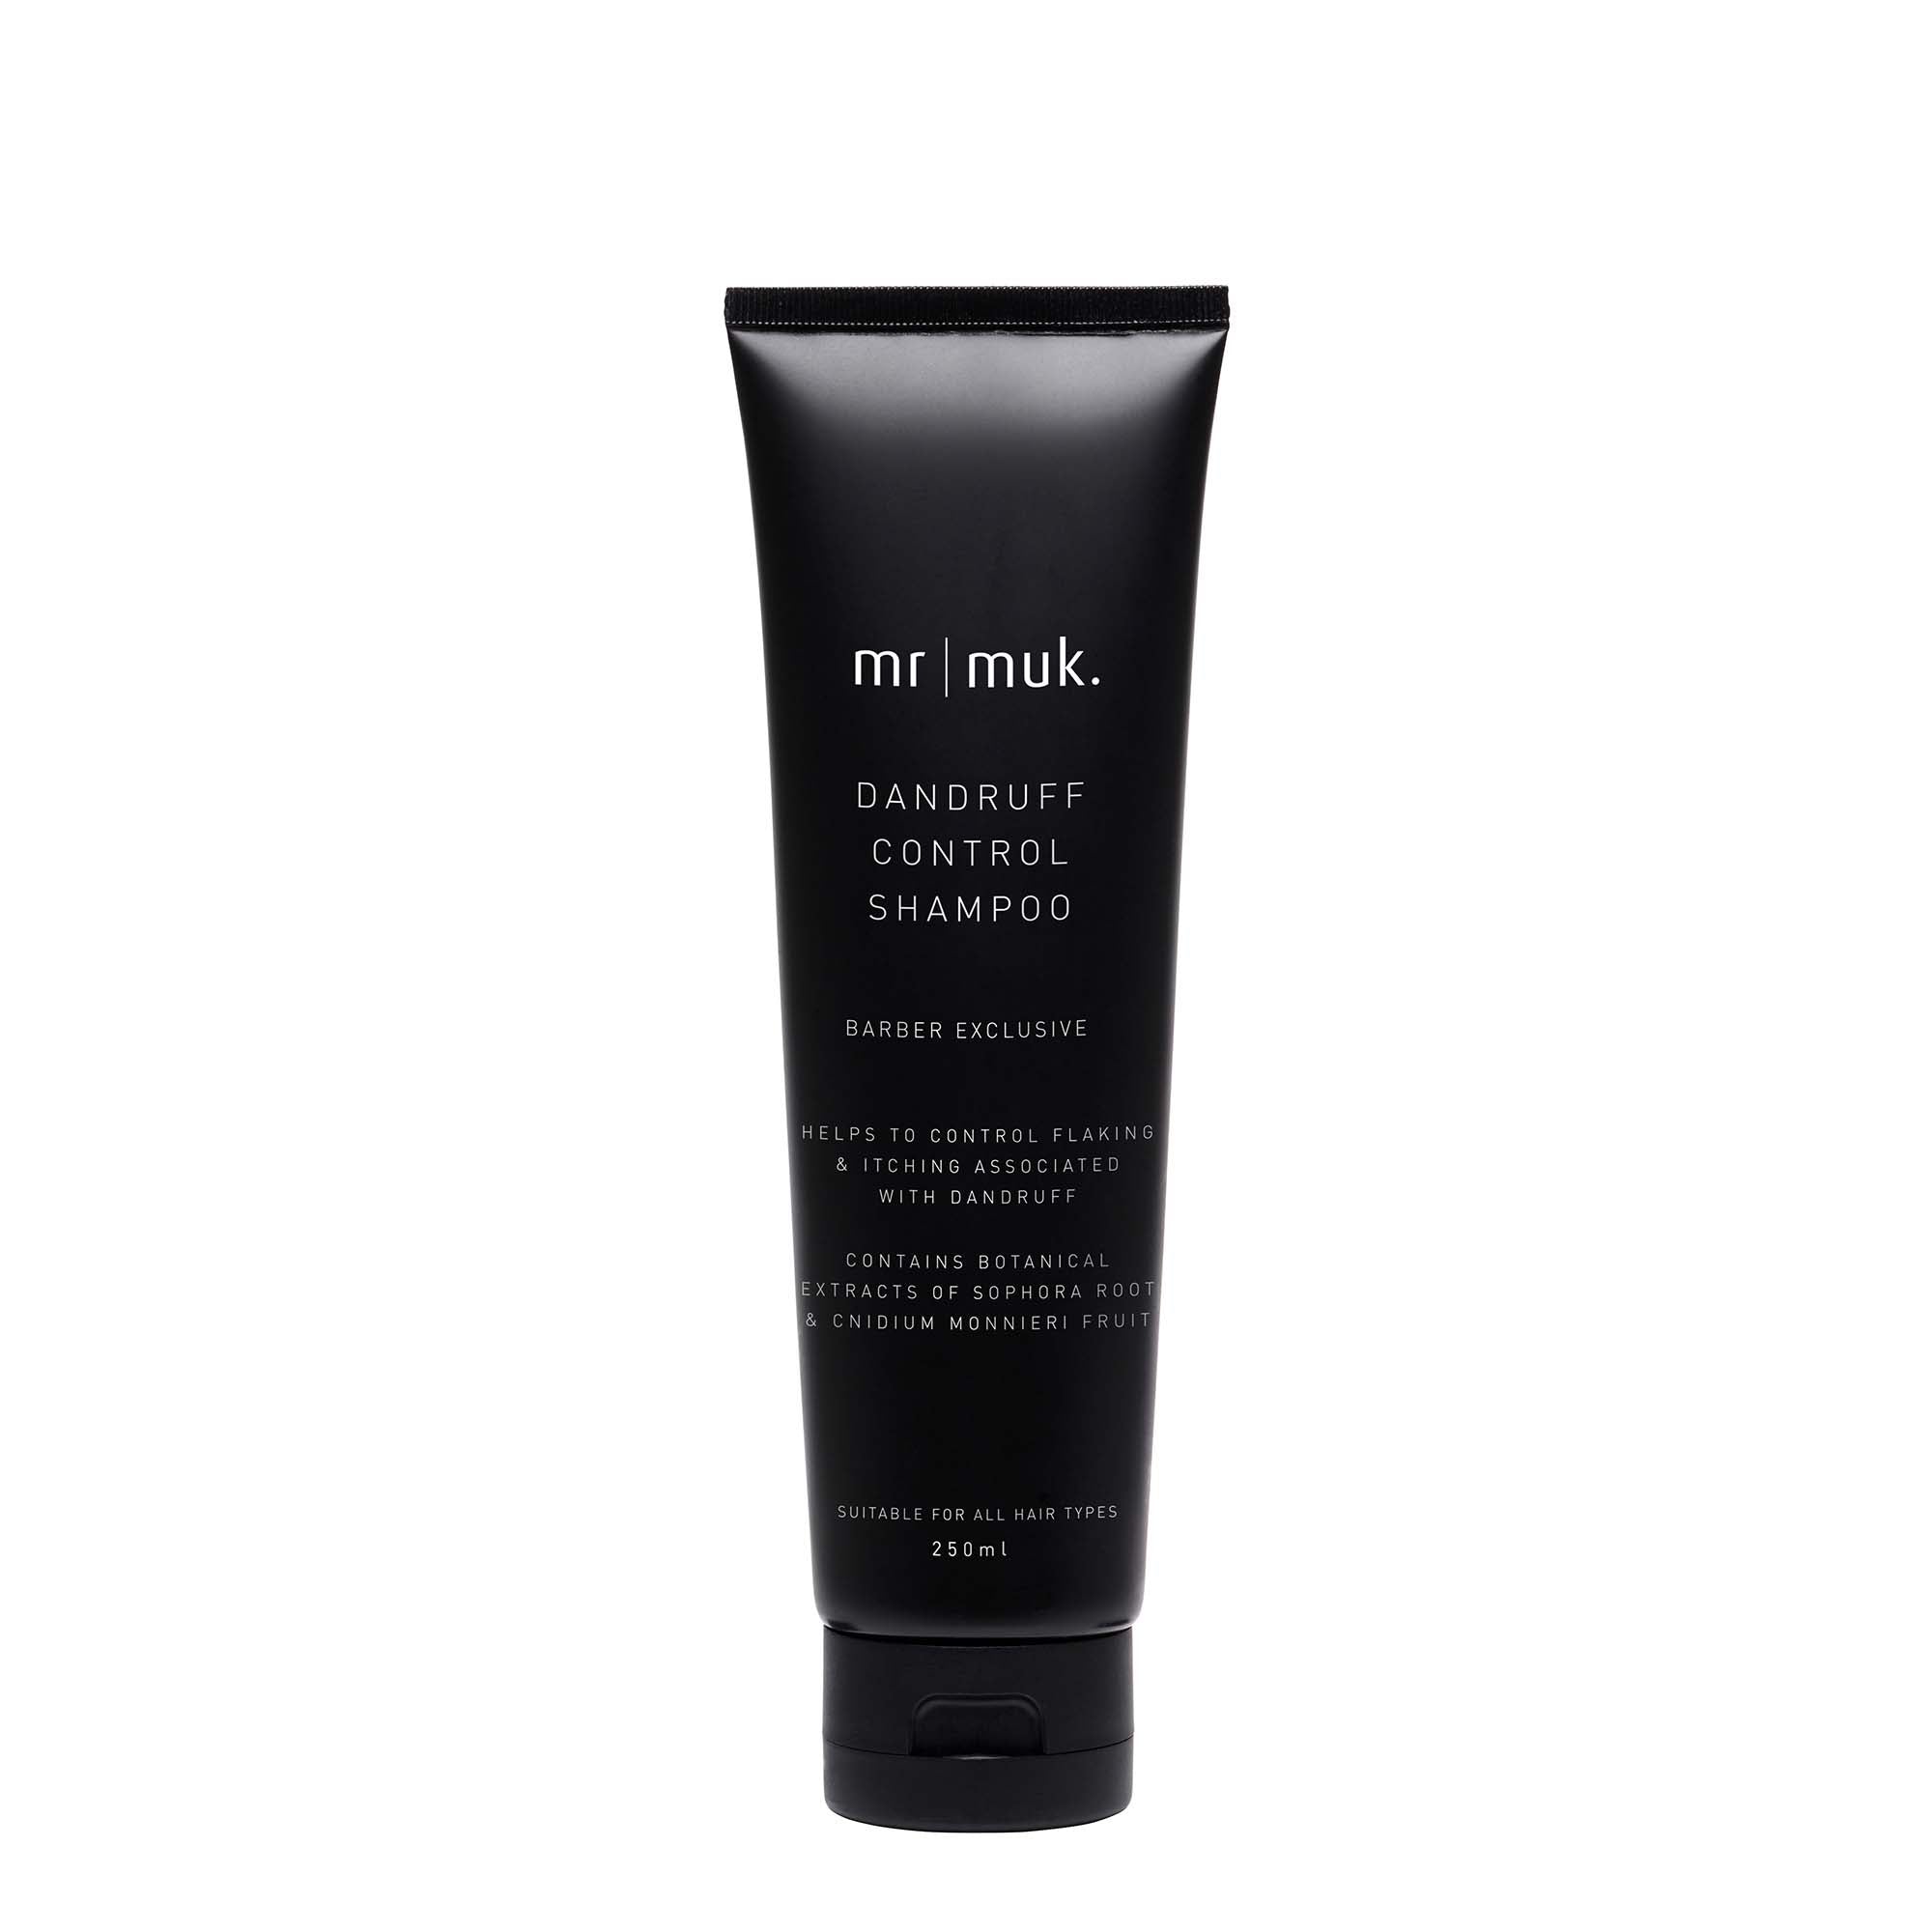 Mr Muk Dandruff Control Shampoo uses sophora root and other natural ingredients to control flaking and itching.